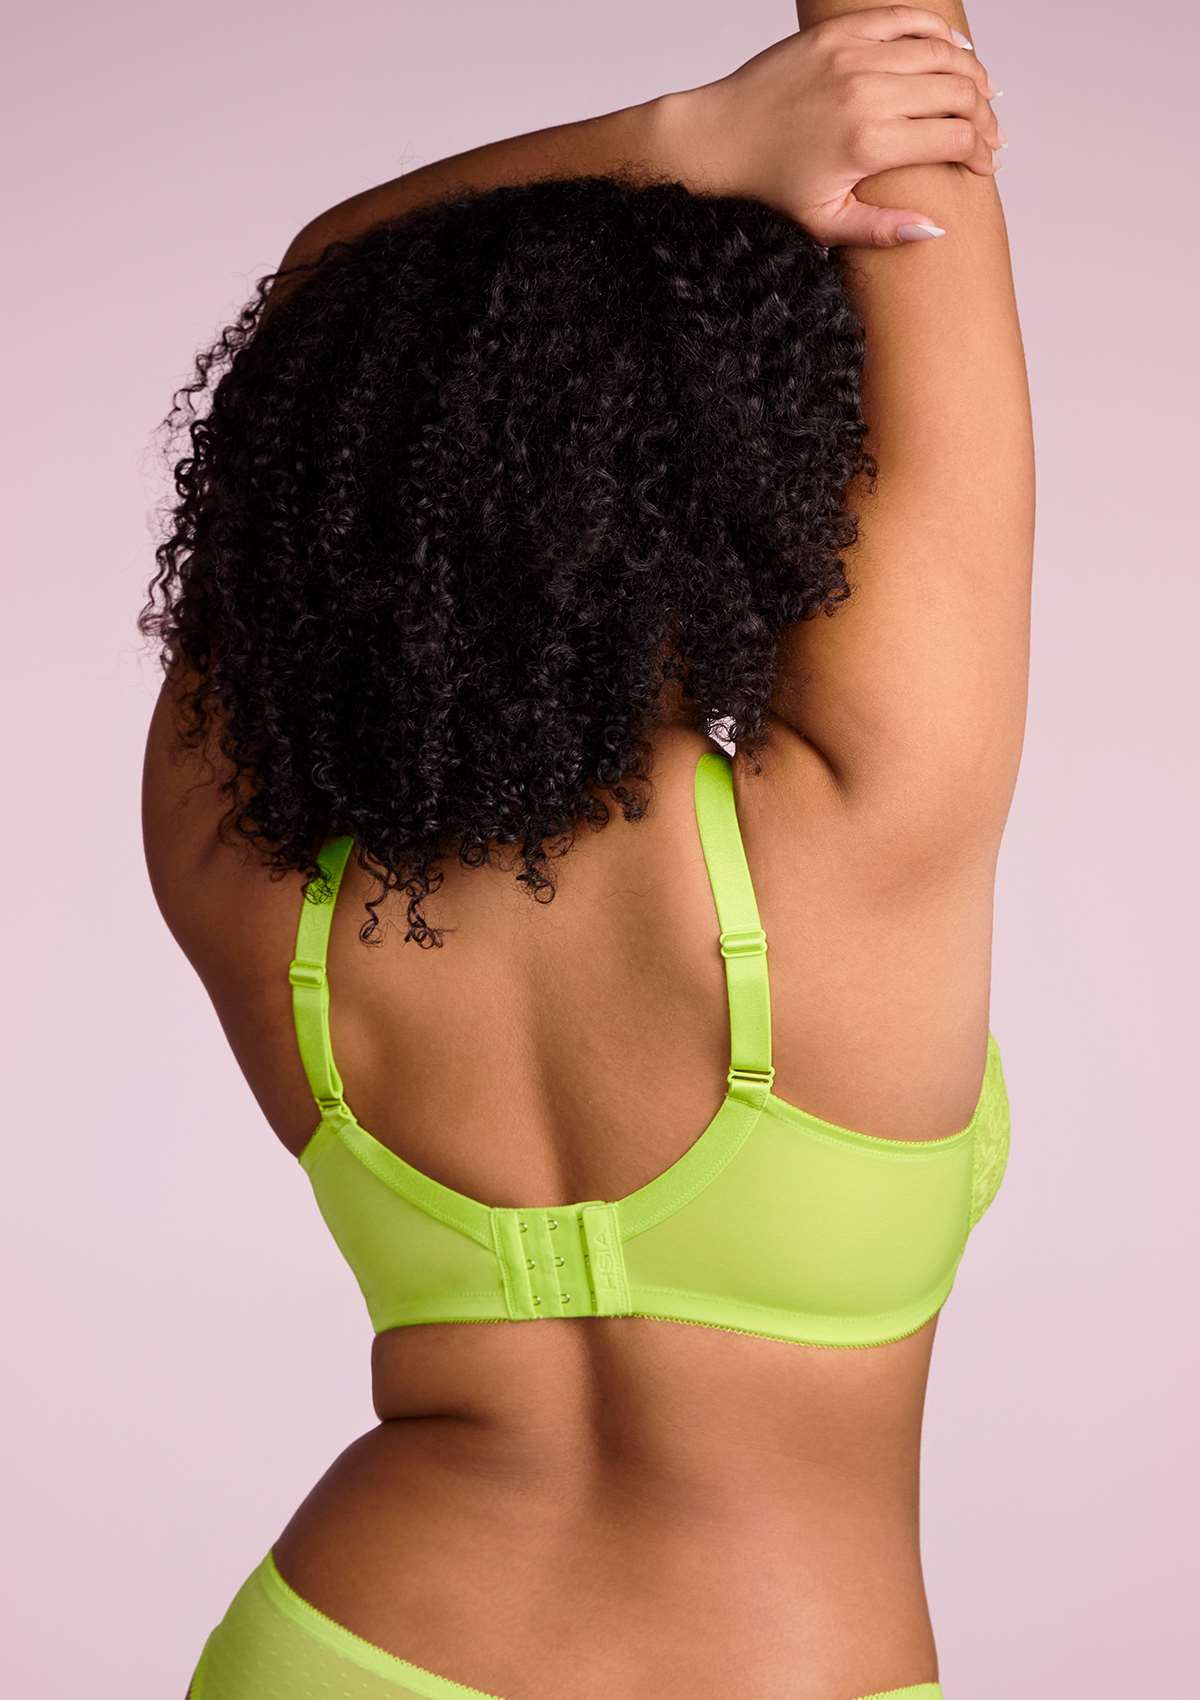 HSIA Enchante Full Cup Minimizing Bra: Supportive Unlined Lace Bra - Lime Green / 38 / G